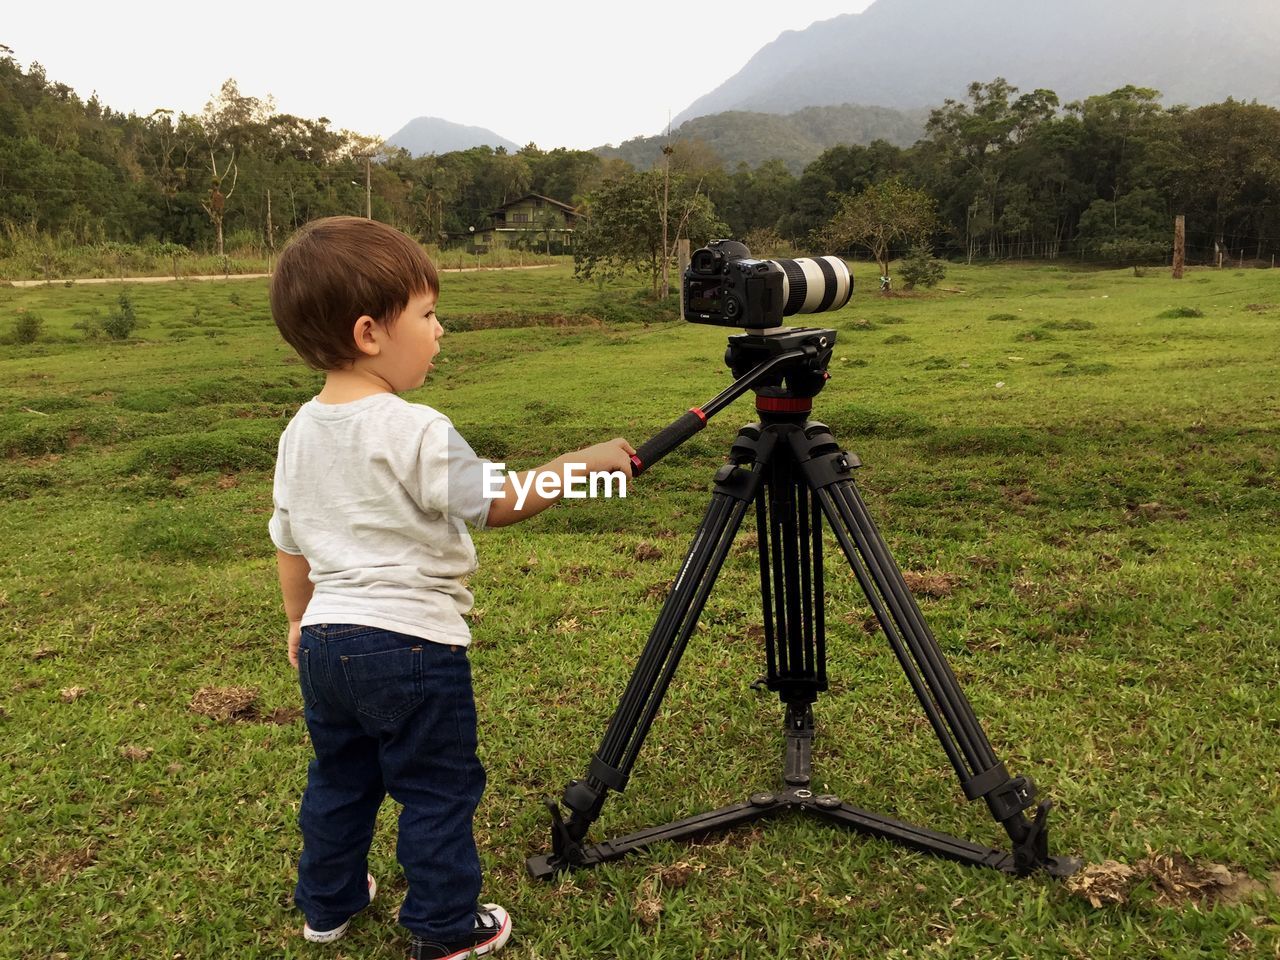 Boy standing by camera on tripod against trees